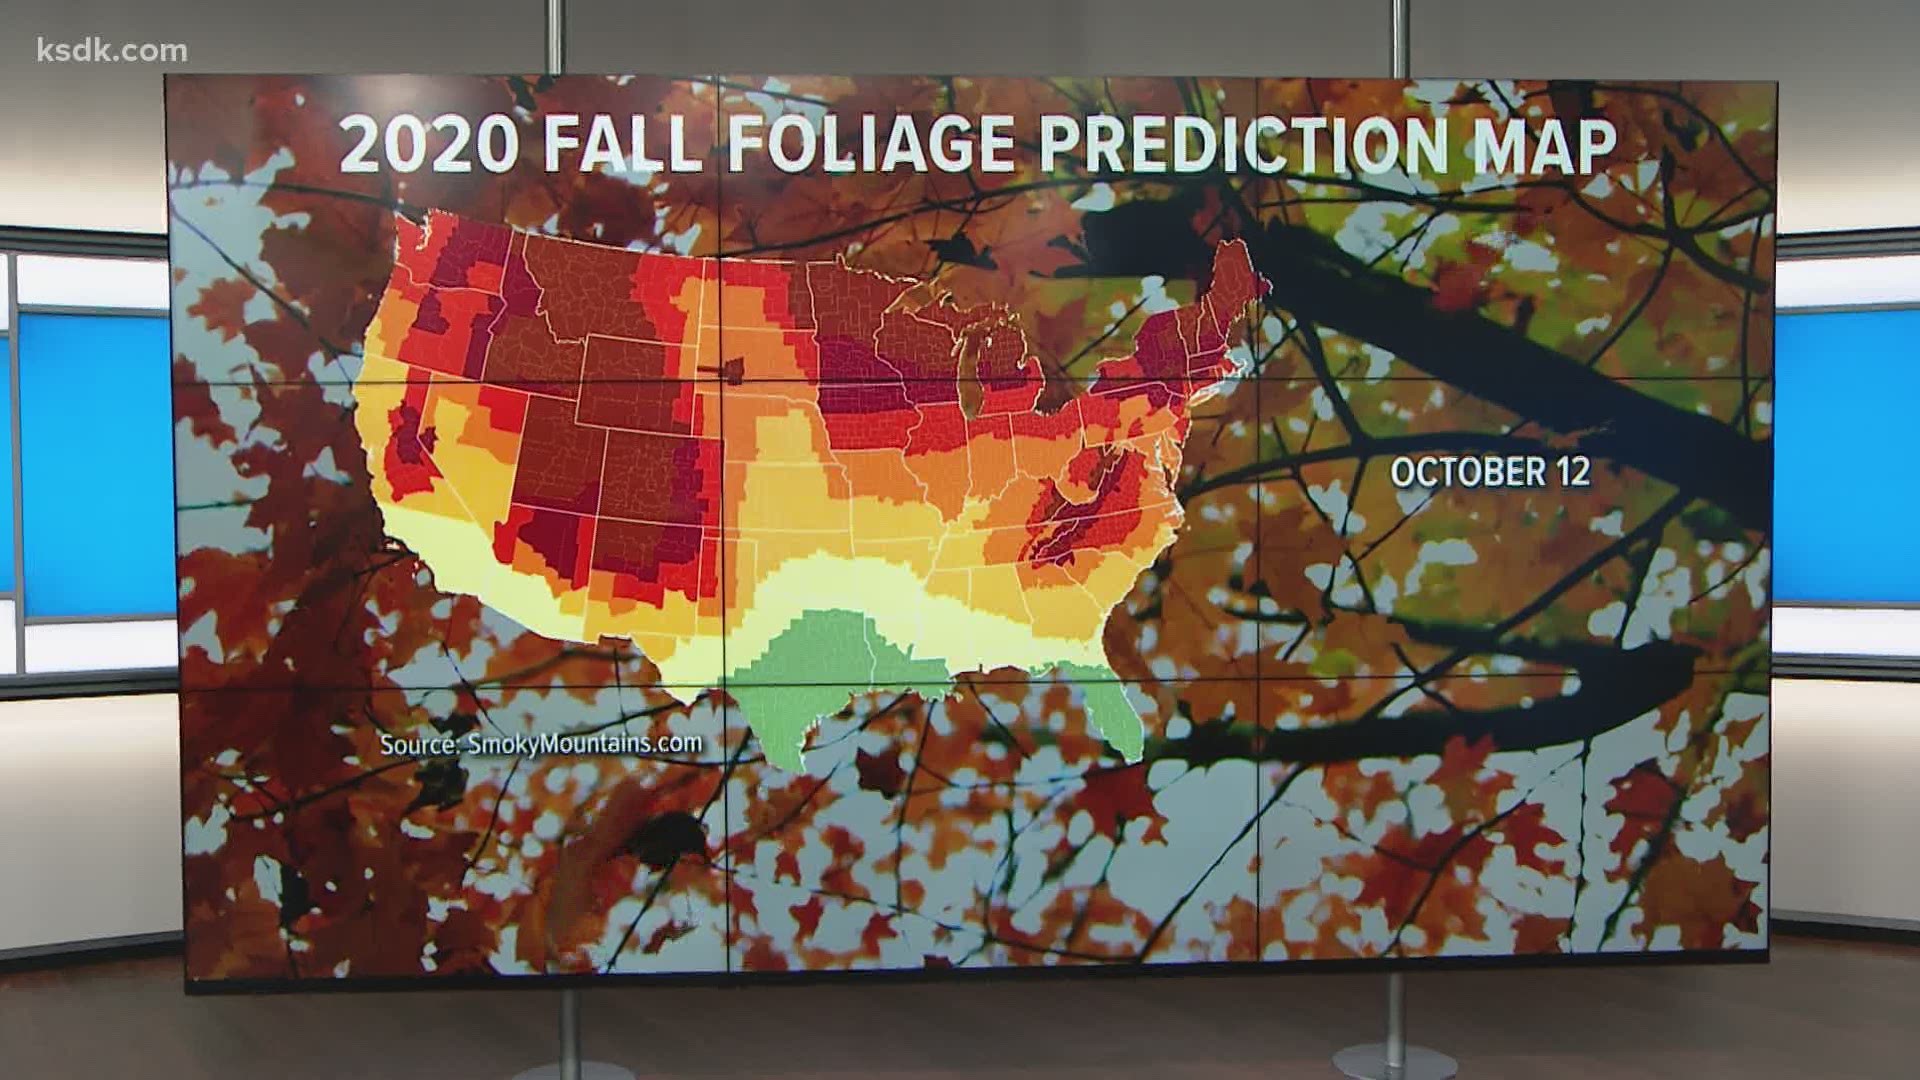 Thinking about a road trip? Here's when the fall foliage will be at its best throughout the U.S.